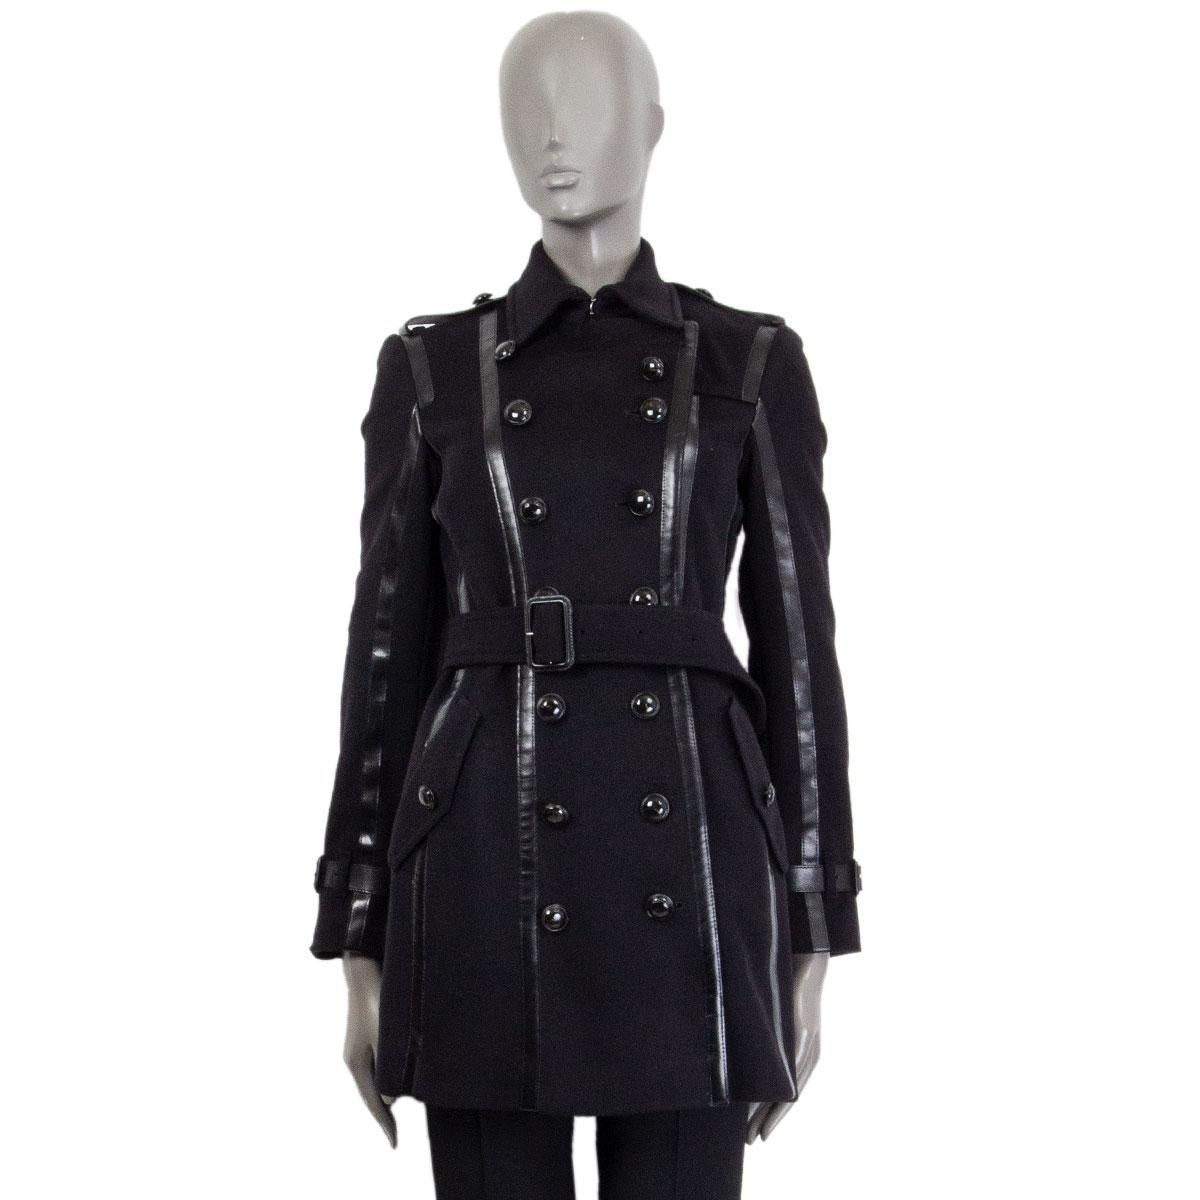 100% authentic Burberry London double breasted wool coat in black virgin wool (80%), cashmere (20%) and black cow leather (100%) details. Closes with one hook at the neck, six buttons on the front and a belt, featuring leather belted cuffs, epaulets